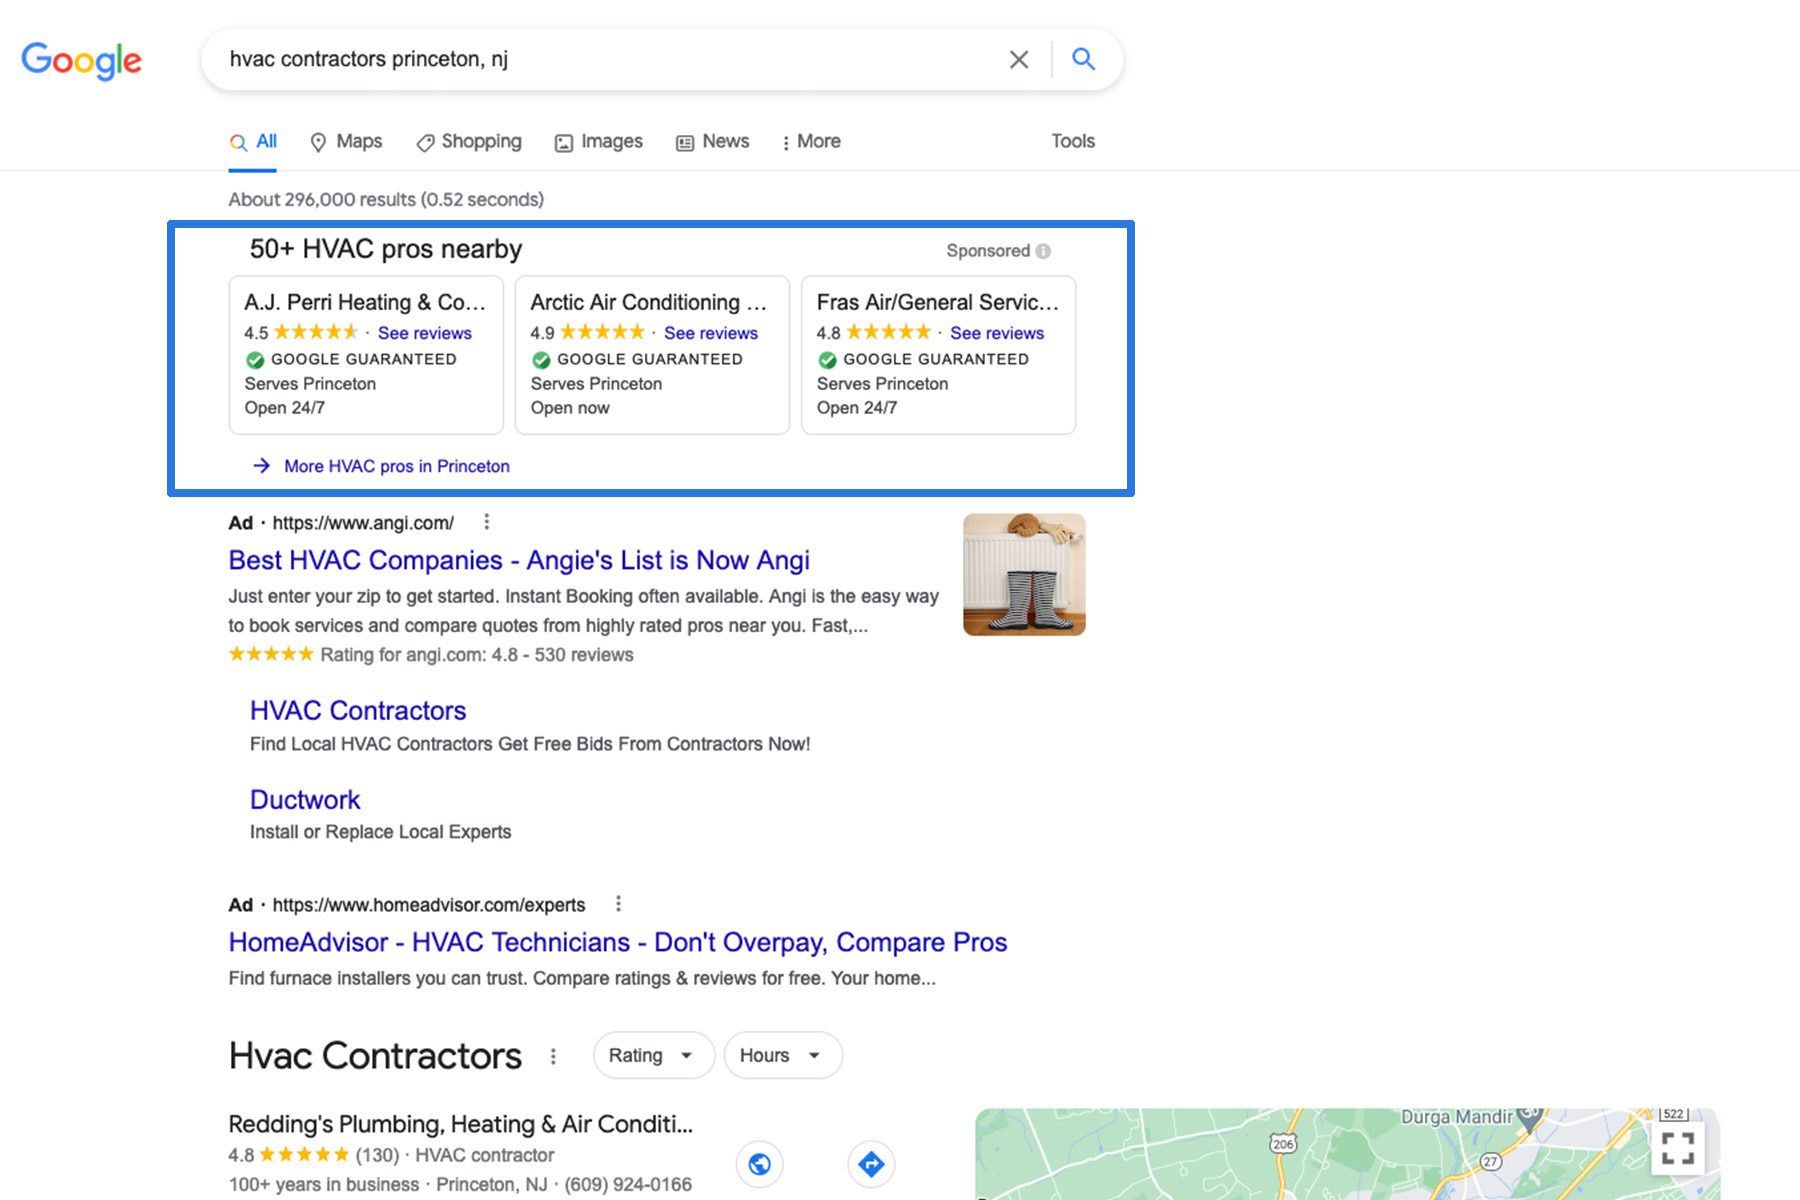 Top Provider of Google Local Service Ads